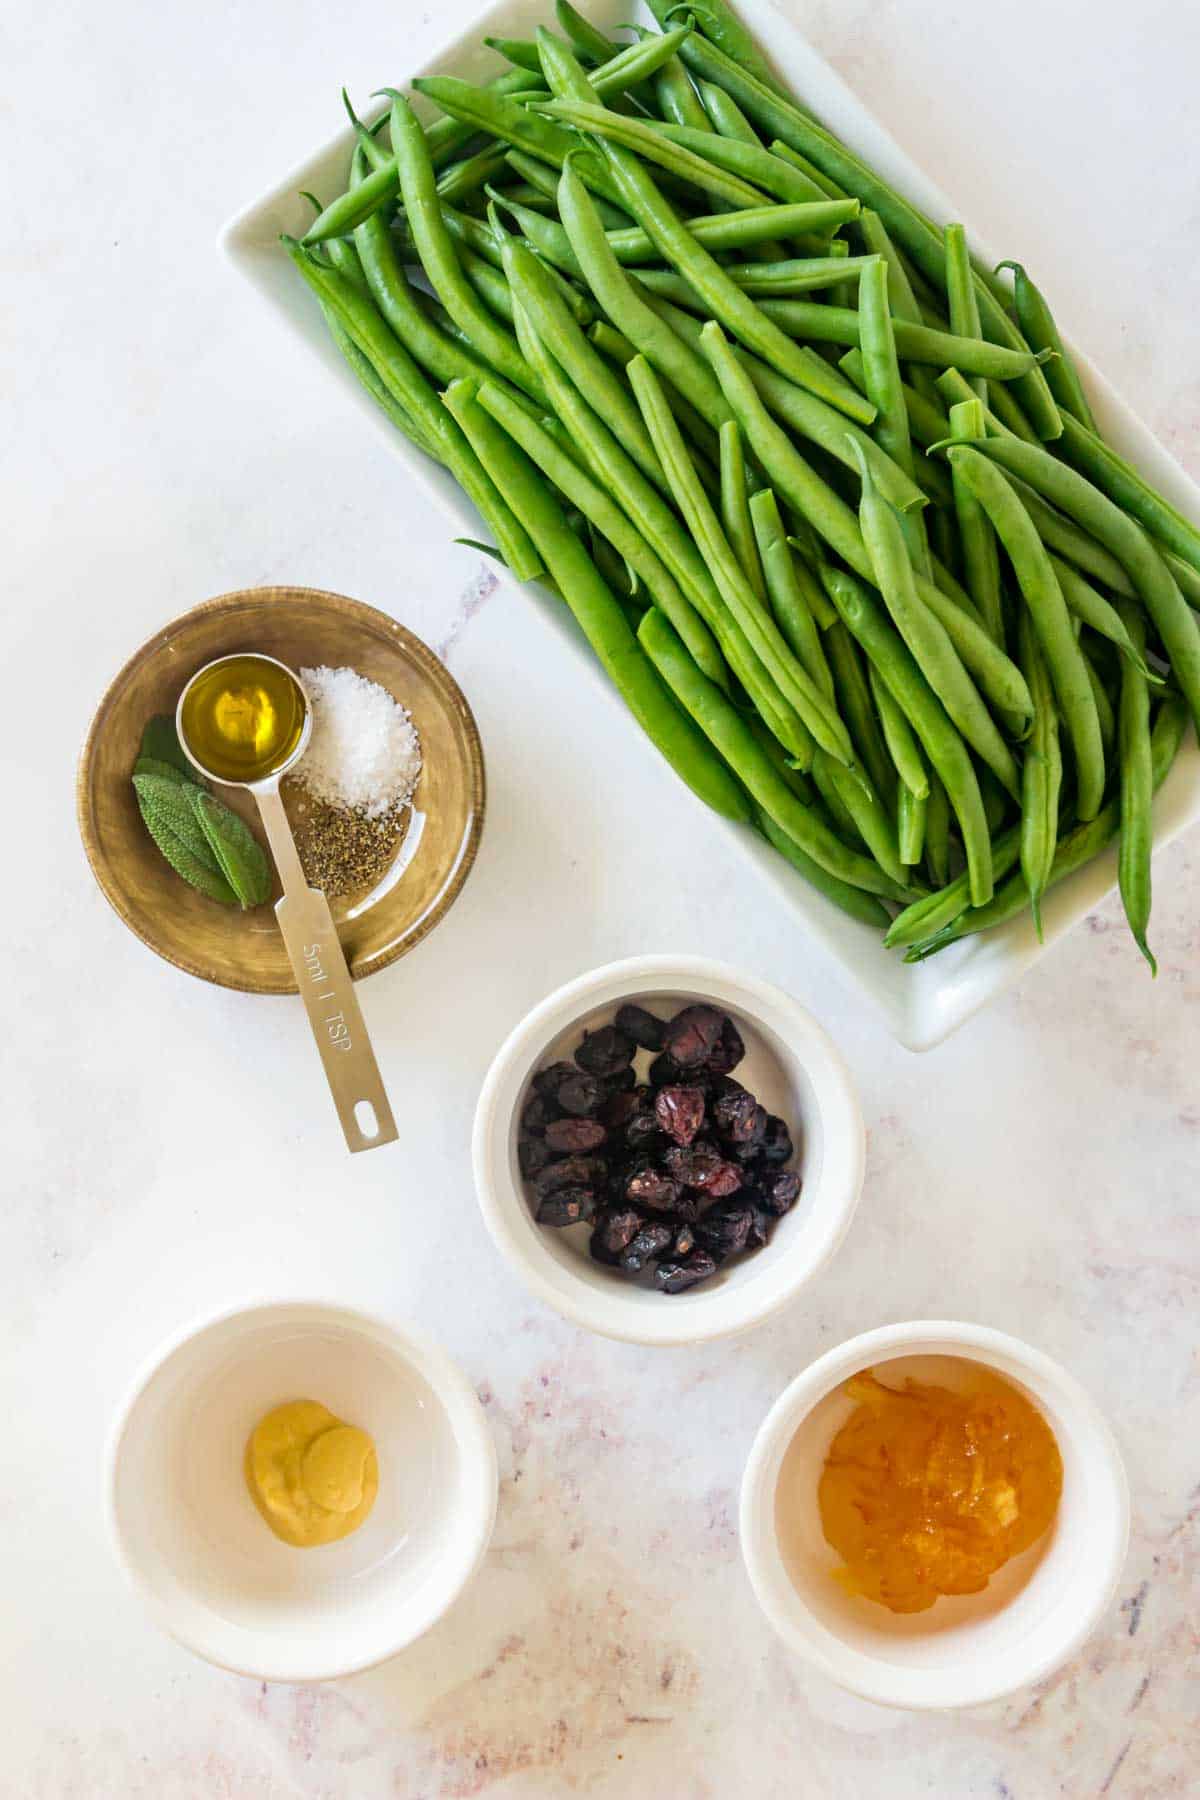 All of the ingredients to make orange glazed green beans with dried cranberries in bowls on a marble countertop.